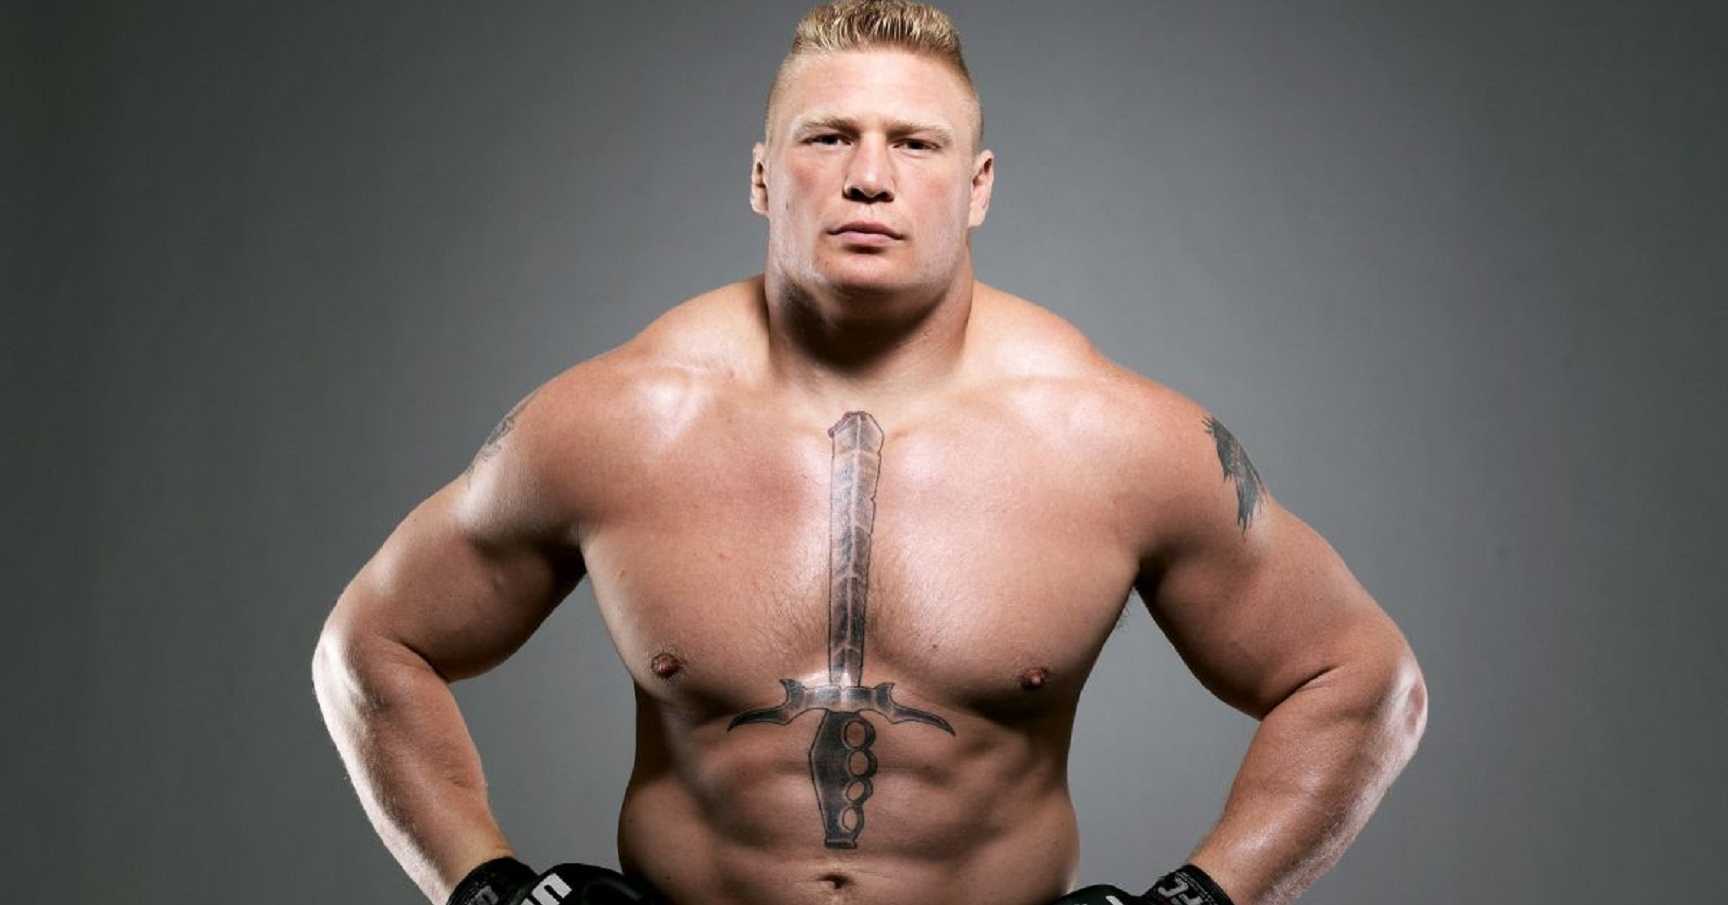 Was Brock Lesnar Found Guilty Of Consuming Steroids